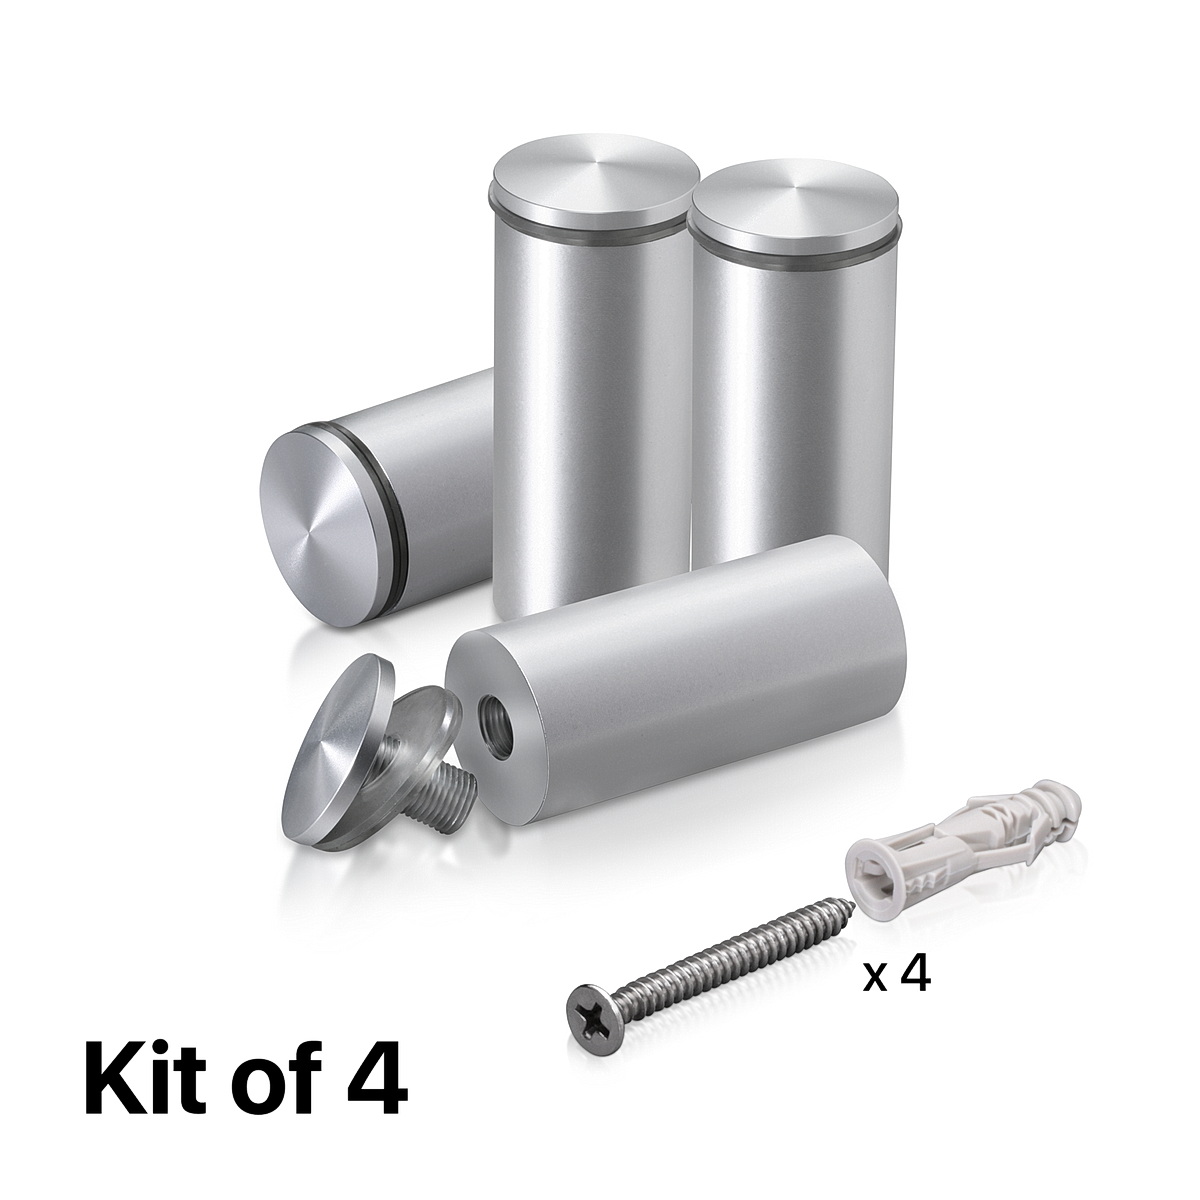 (Set of 4) 1-1/4'' Diameter X 2-1/2'' Barrel Length, Aluminum Rounded Head Standoffs, Clear Anodized Finish Standoff with (4) 2216Z Screws and (4) LANC1 Anchors for concrete or drywall (For Inside / Outside use) [Required Material Hole Size: 7/16'']